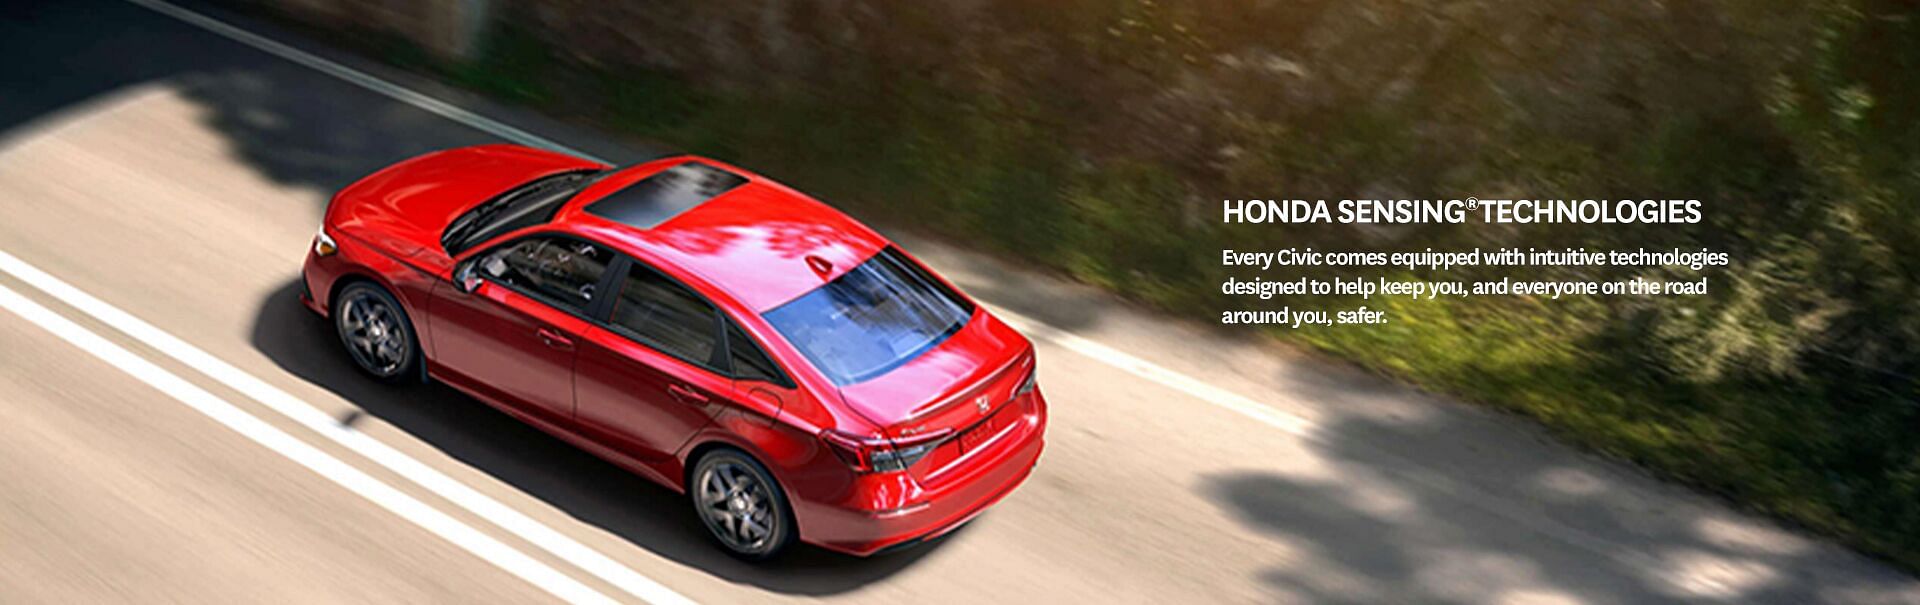 Honda Sensing®Technologies. Every Pilot comes equipped with an expanded list of intuitive technologies designed to help keep you, and everyone on the road around you, safer. Like, Rear seat reminder*, Traffic Sign Recognition, Traffic Jam Assist, and Adaptive Cruise Control* with Low-Speed Follow.